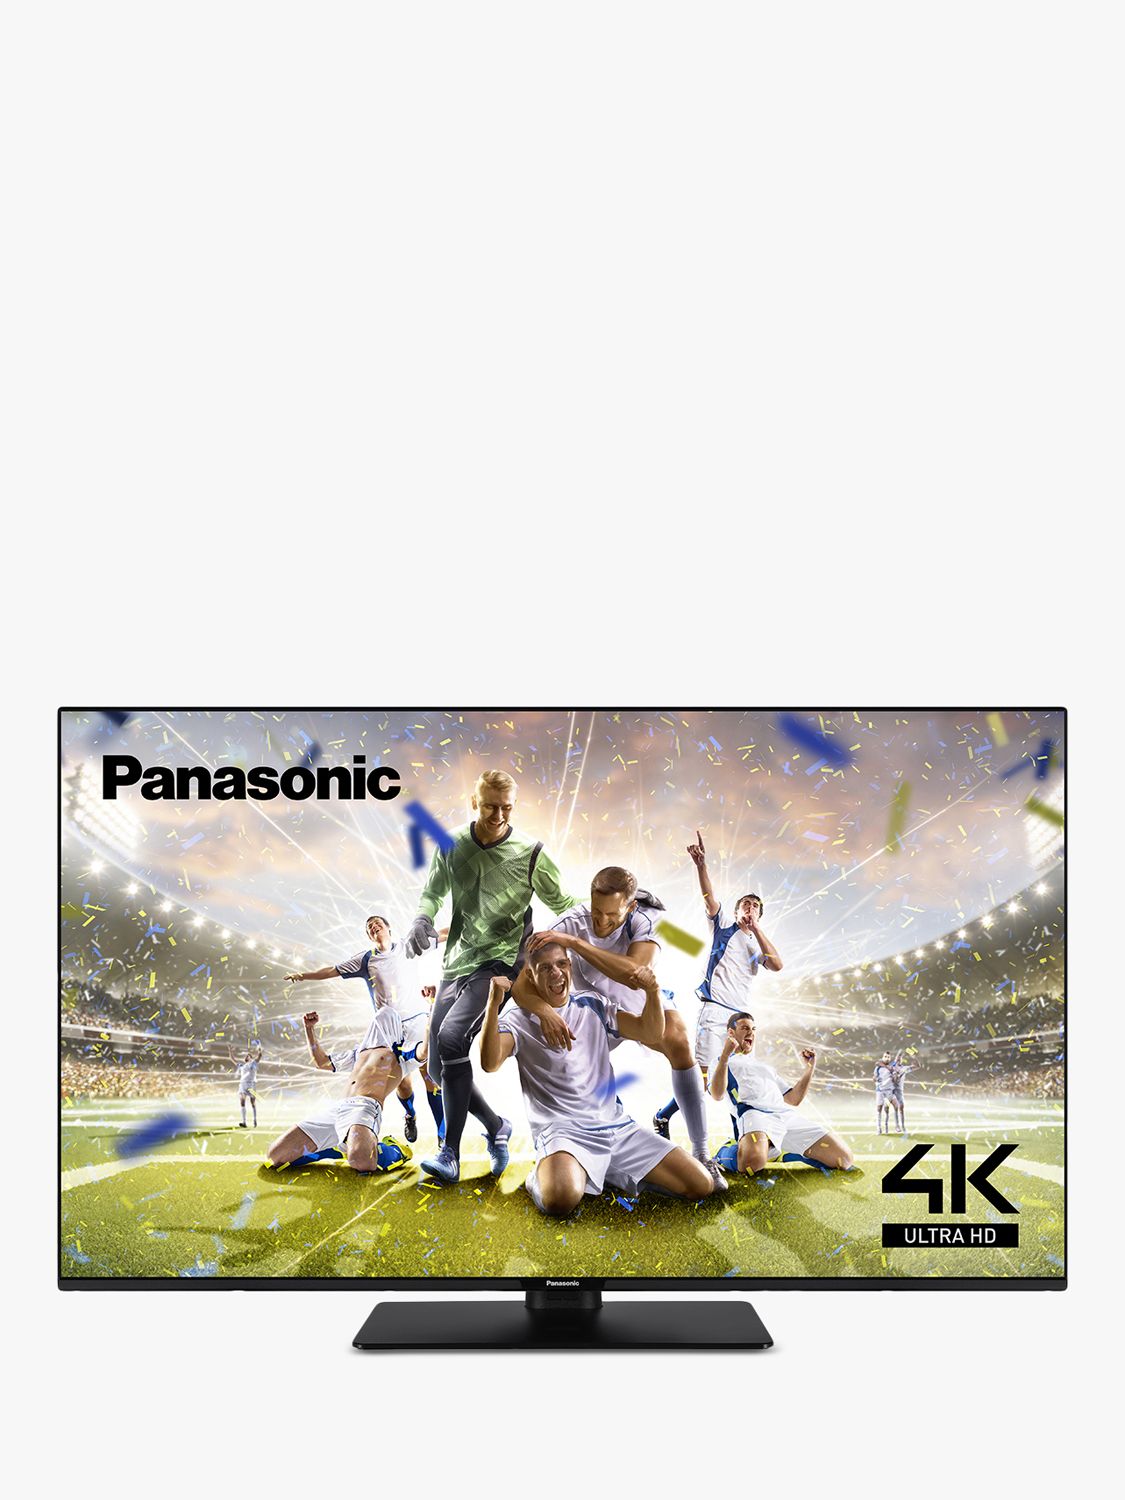 How to Uninstall Apps on Panasonic TV? 